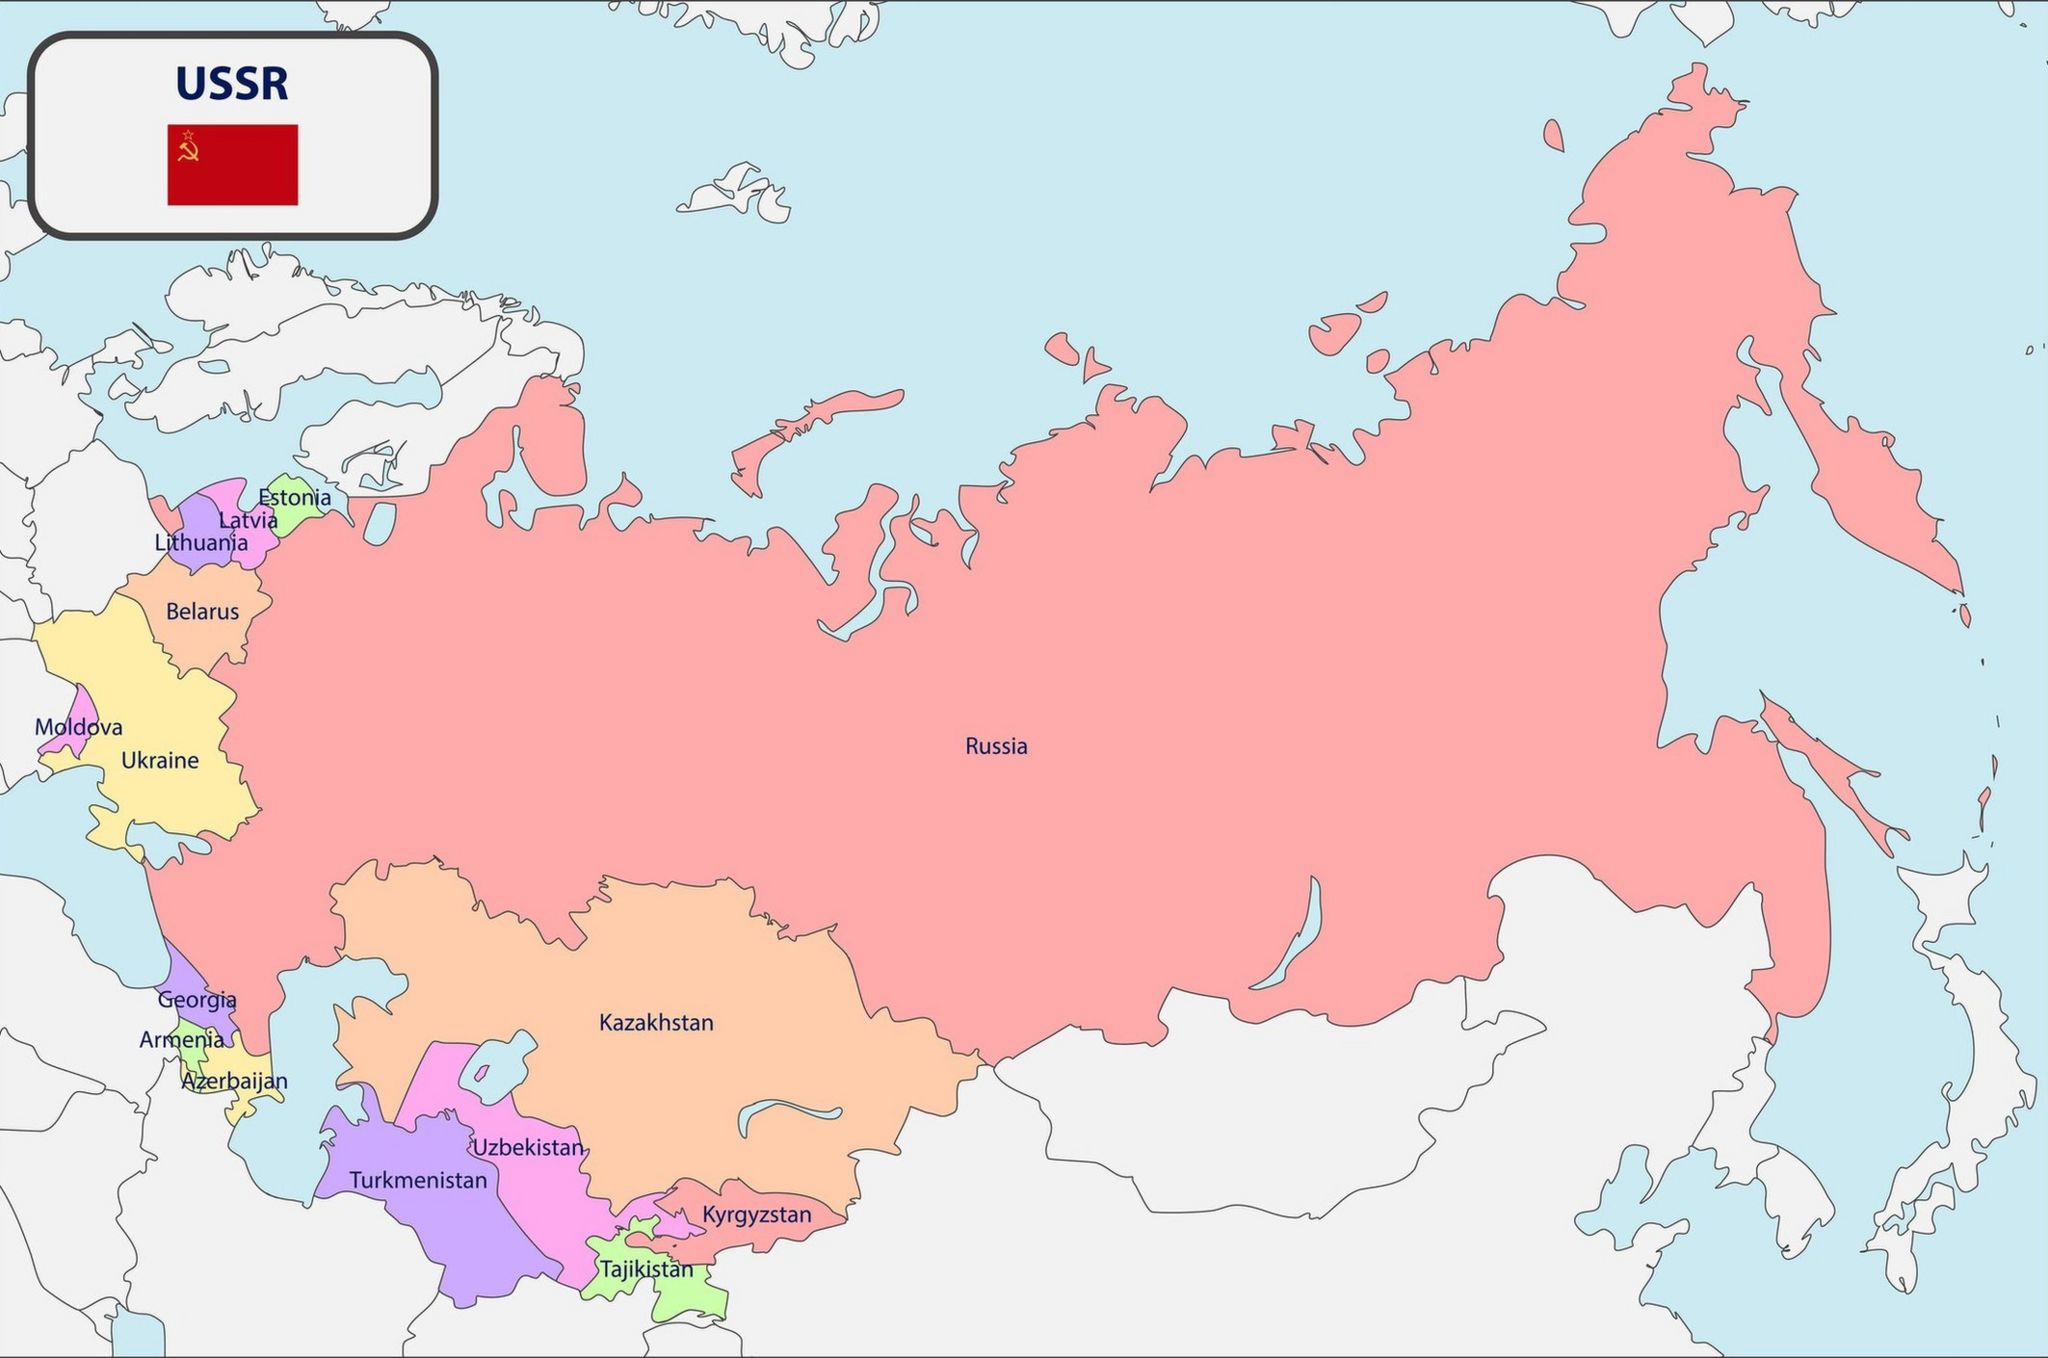 Countries that made up the USSR